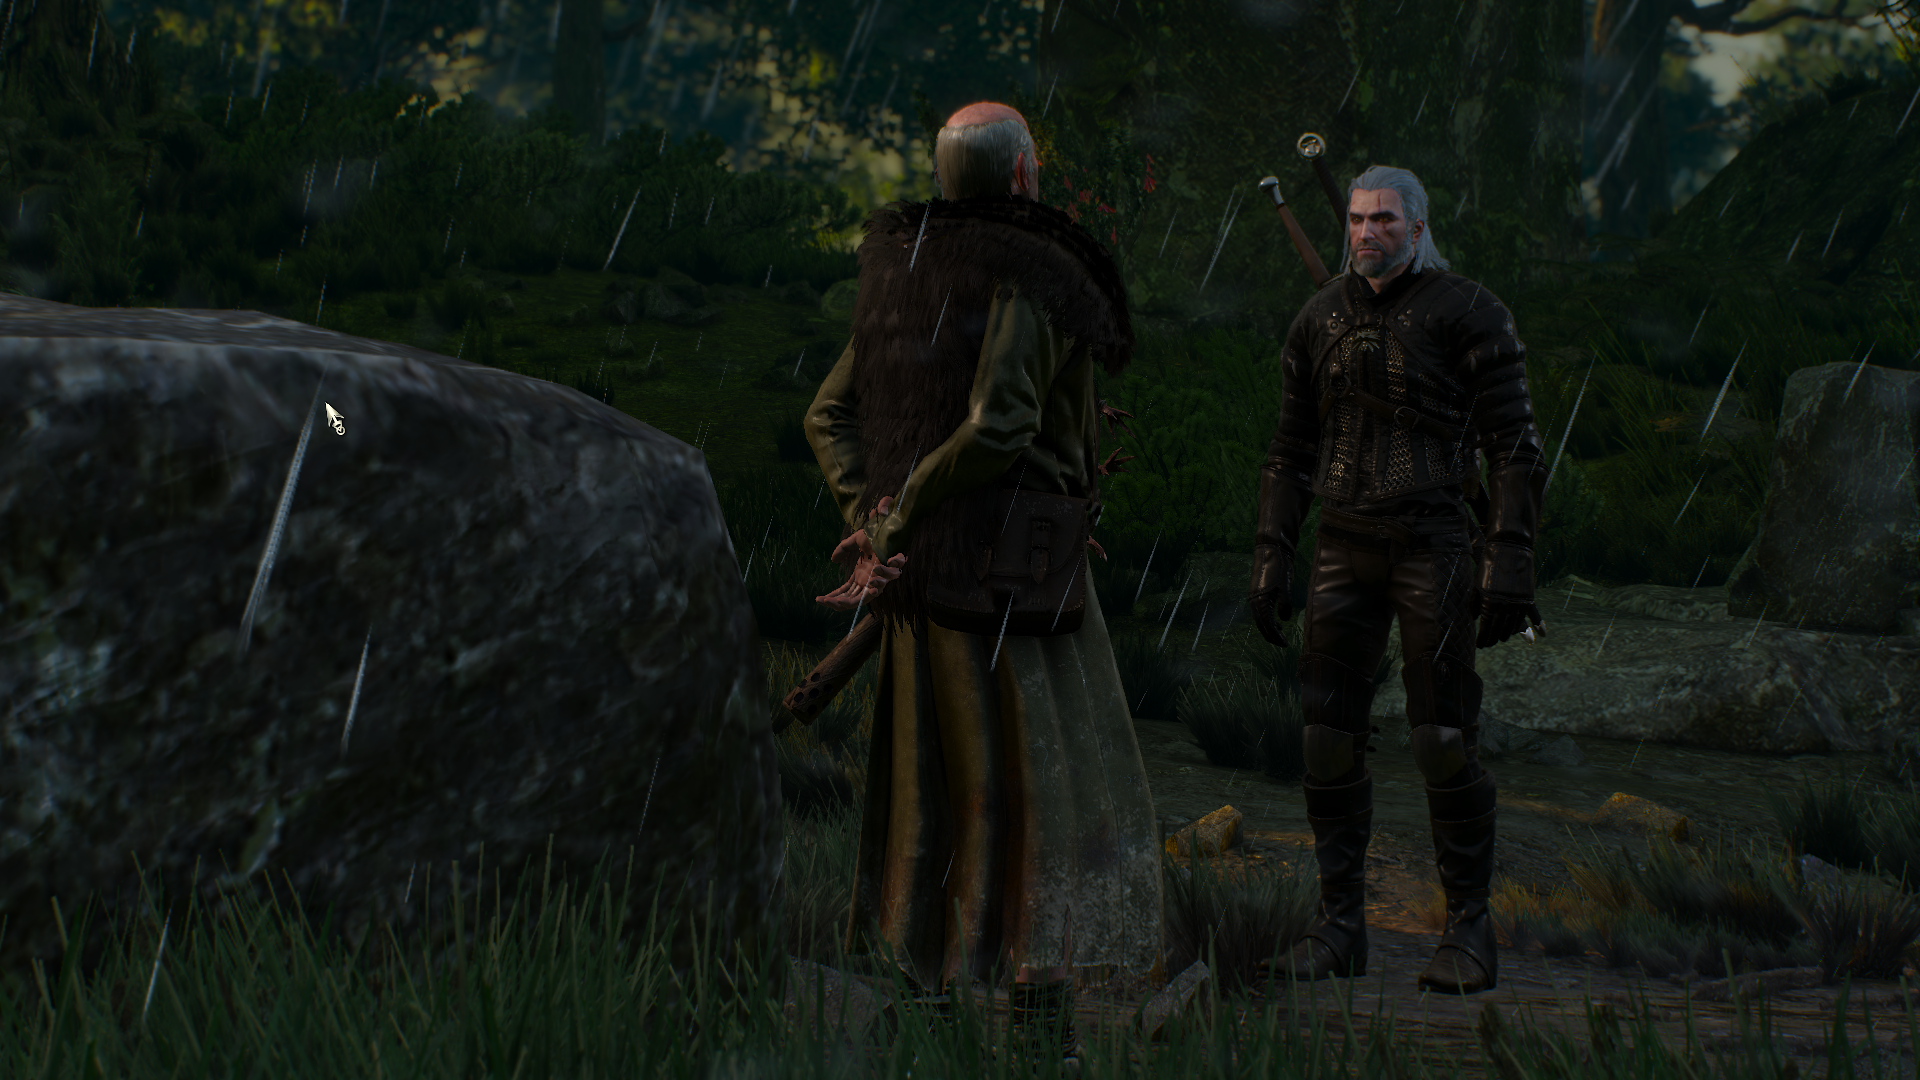 General 1920x1080 The Witcher The Witcher 3: Wild Hunt CD Projekt RED video games video game characters Book characters Geralt of Rivia